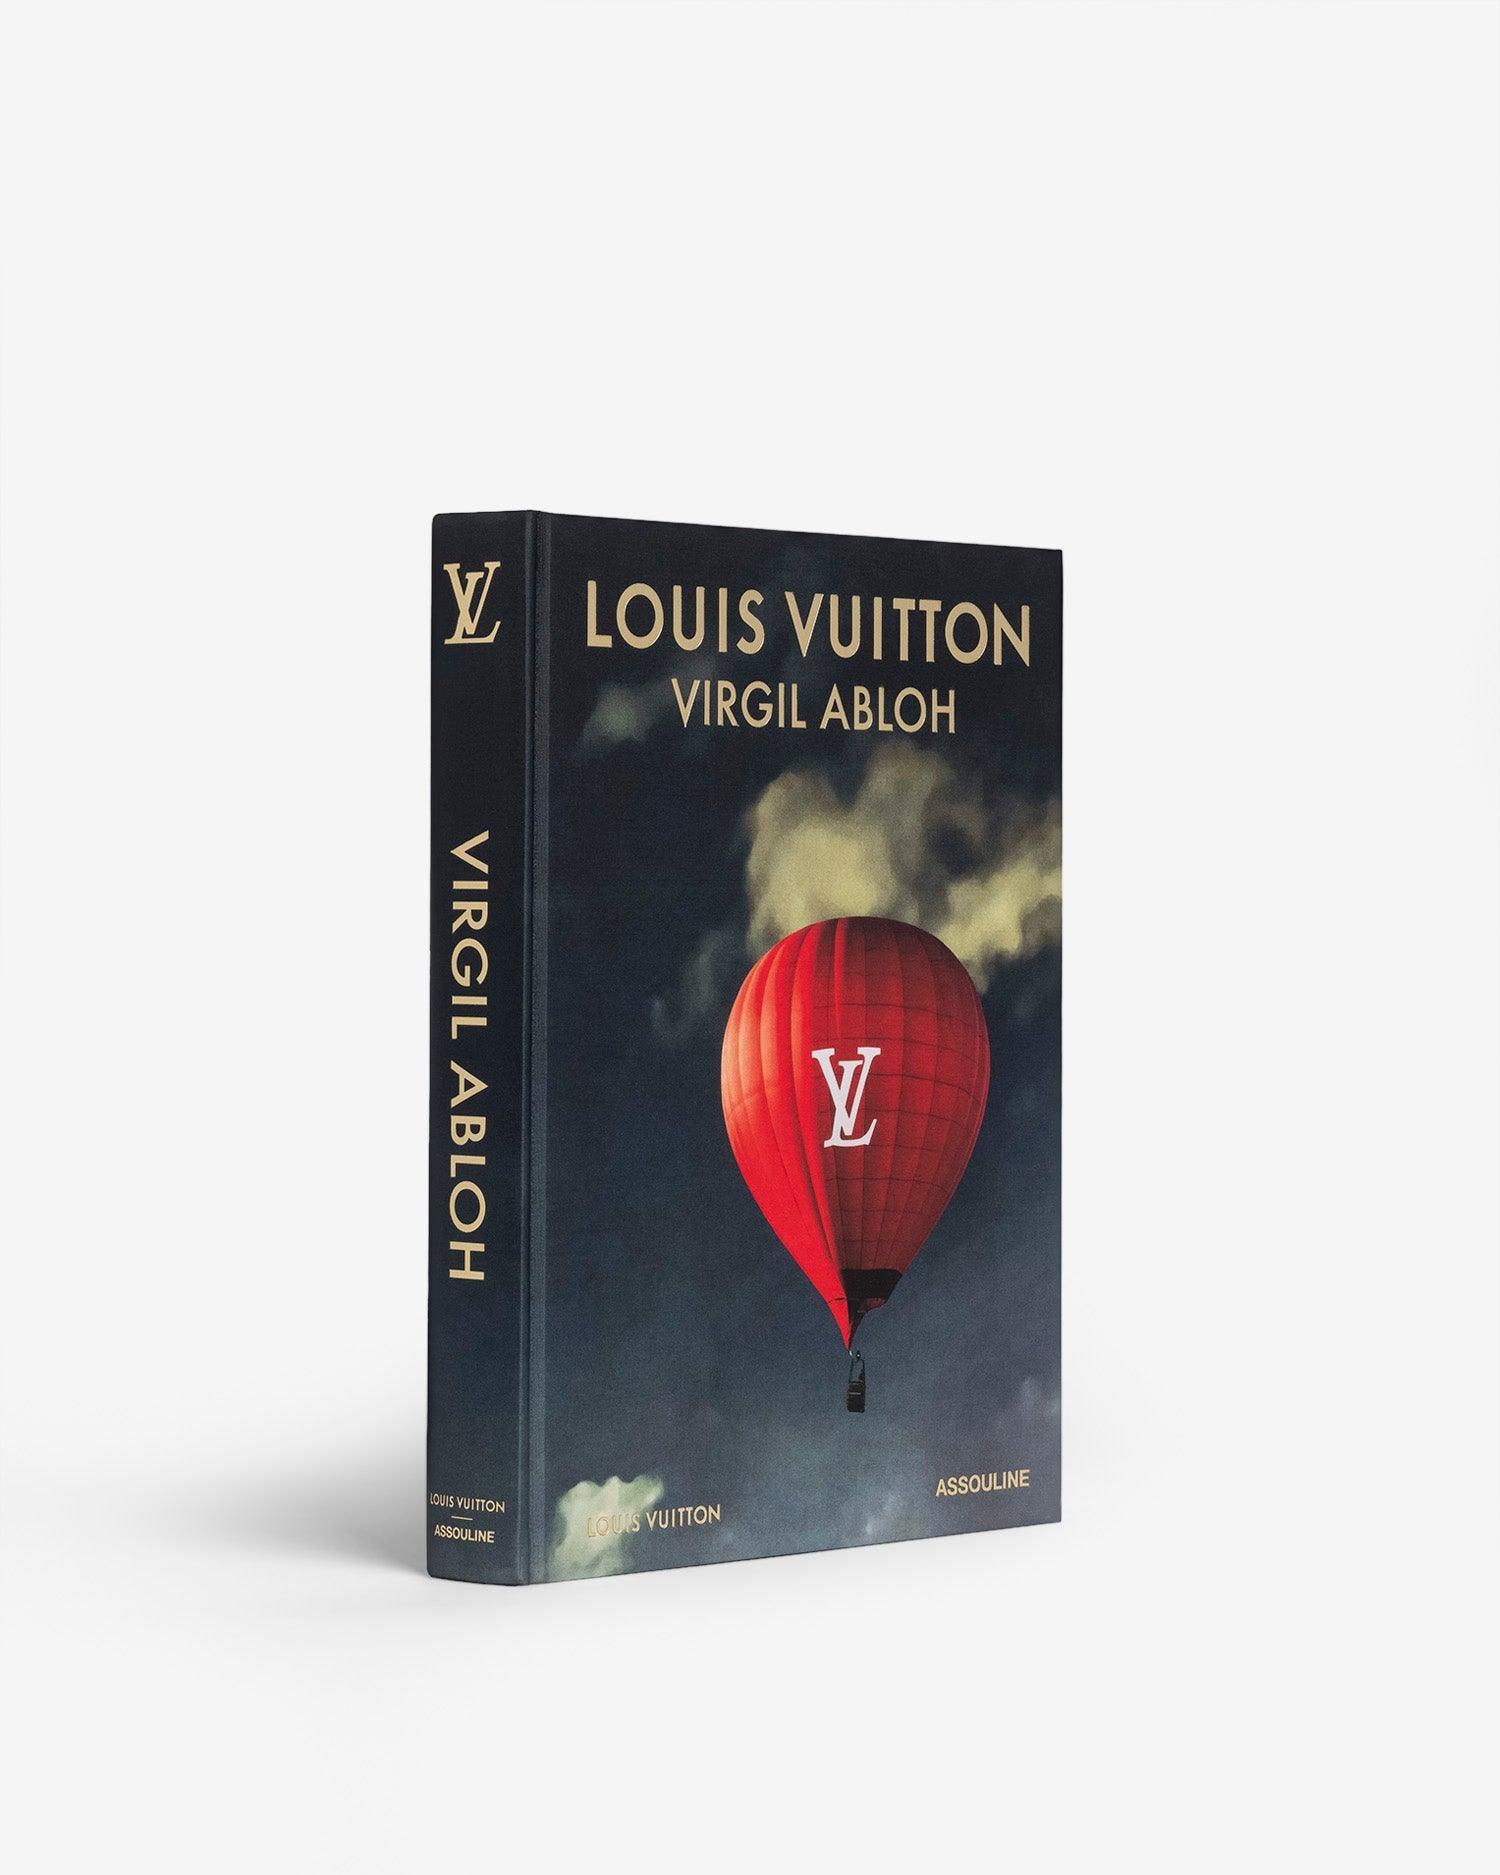 Louis Vuitton: Virgil Abloh (Balloon Cover) by Anders Christian Madsen - Coffee Table Book | ASSOULINE